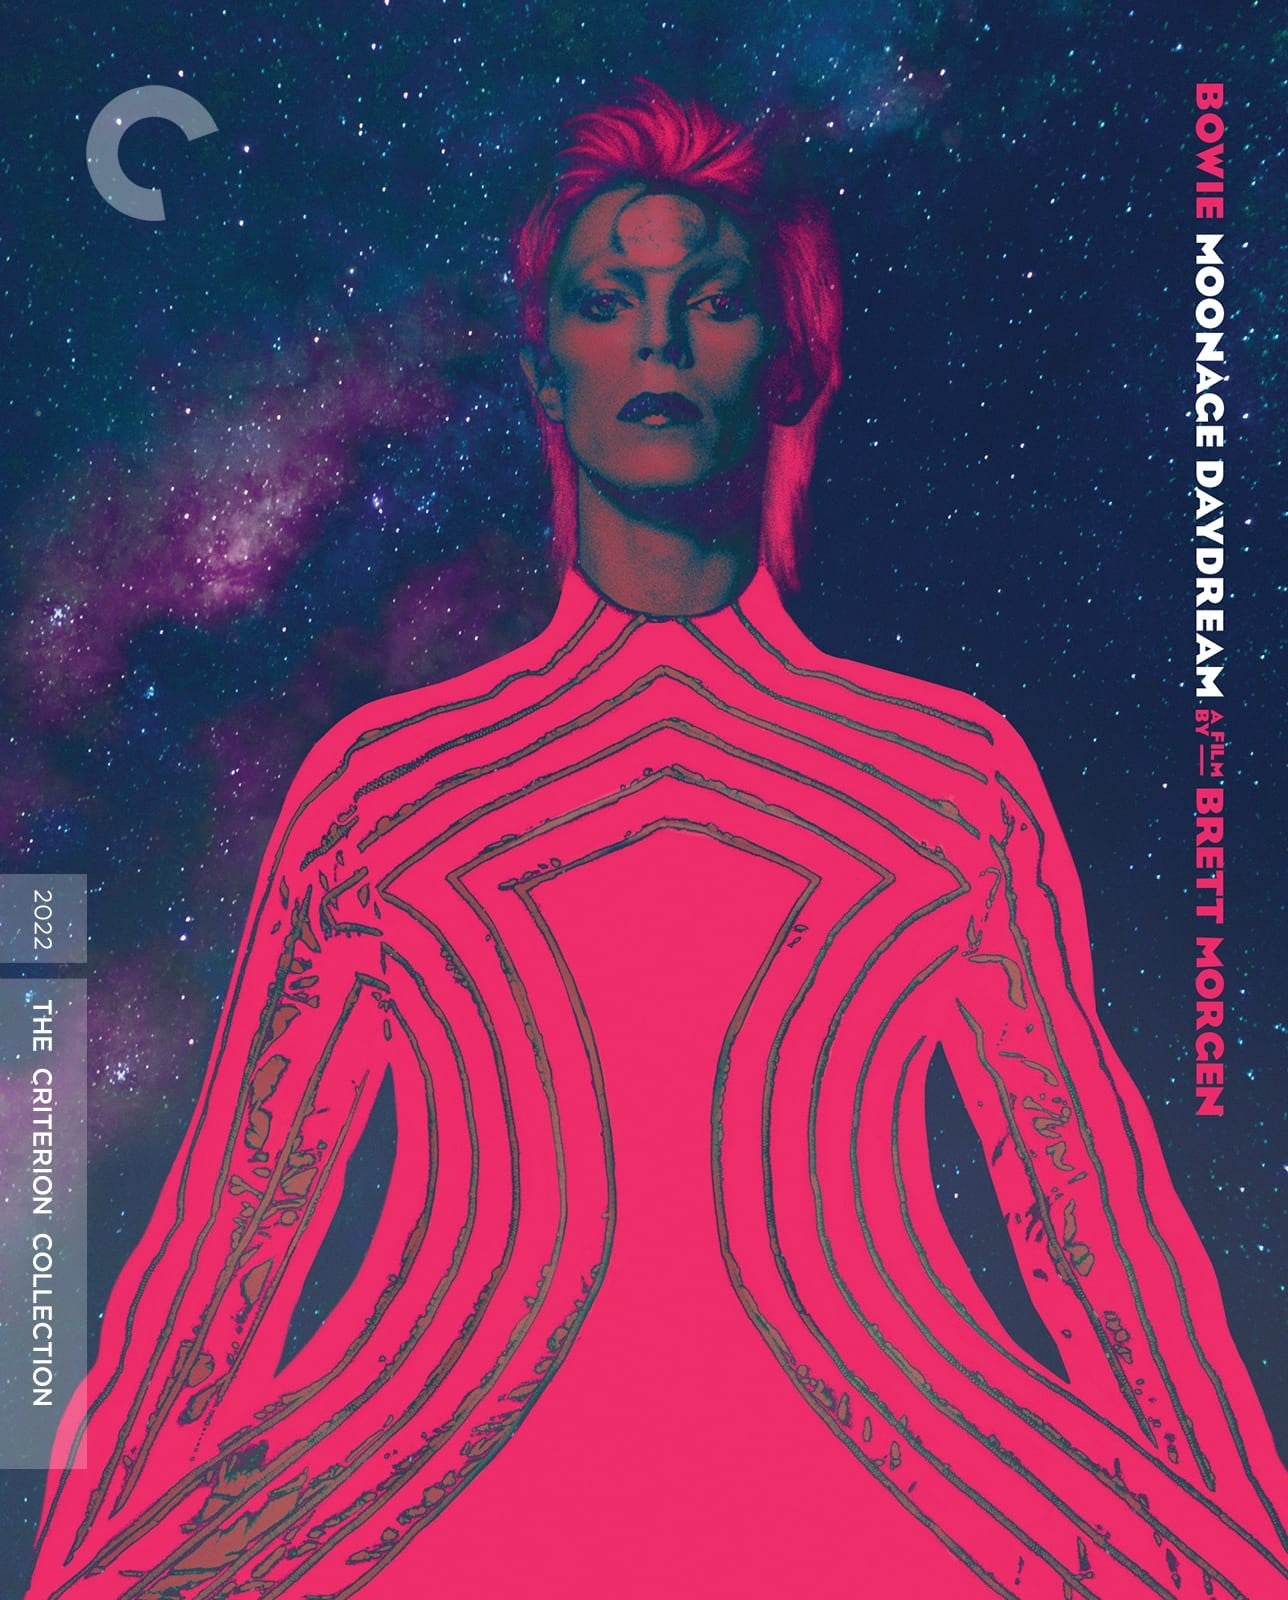 Moonage Daydream The Criterion Collection 4K UHD/Blu-Ray [NEW] [SLIPCOVER]